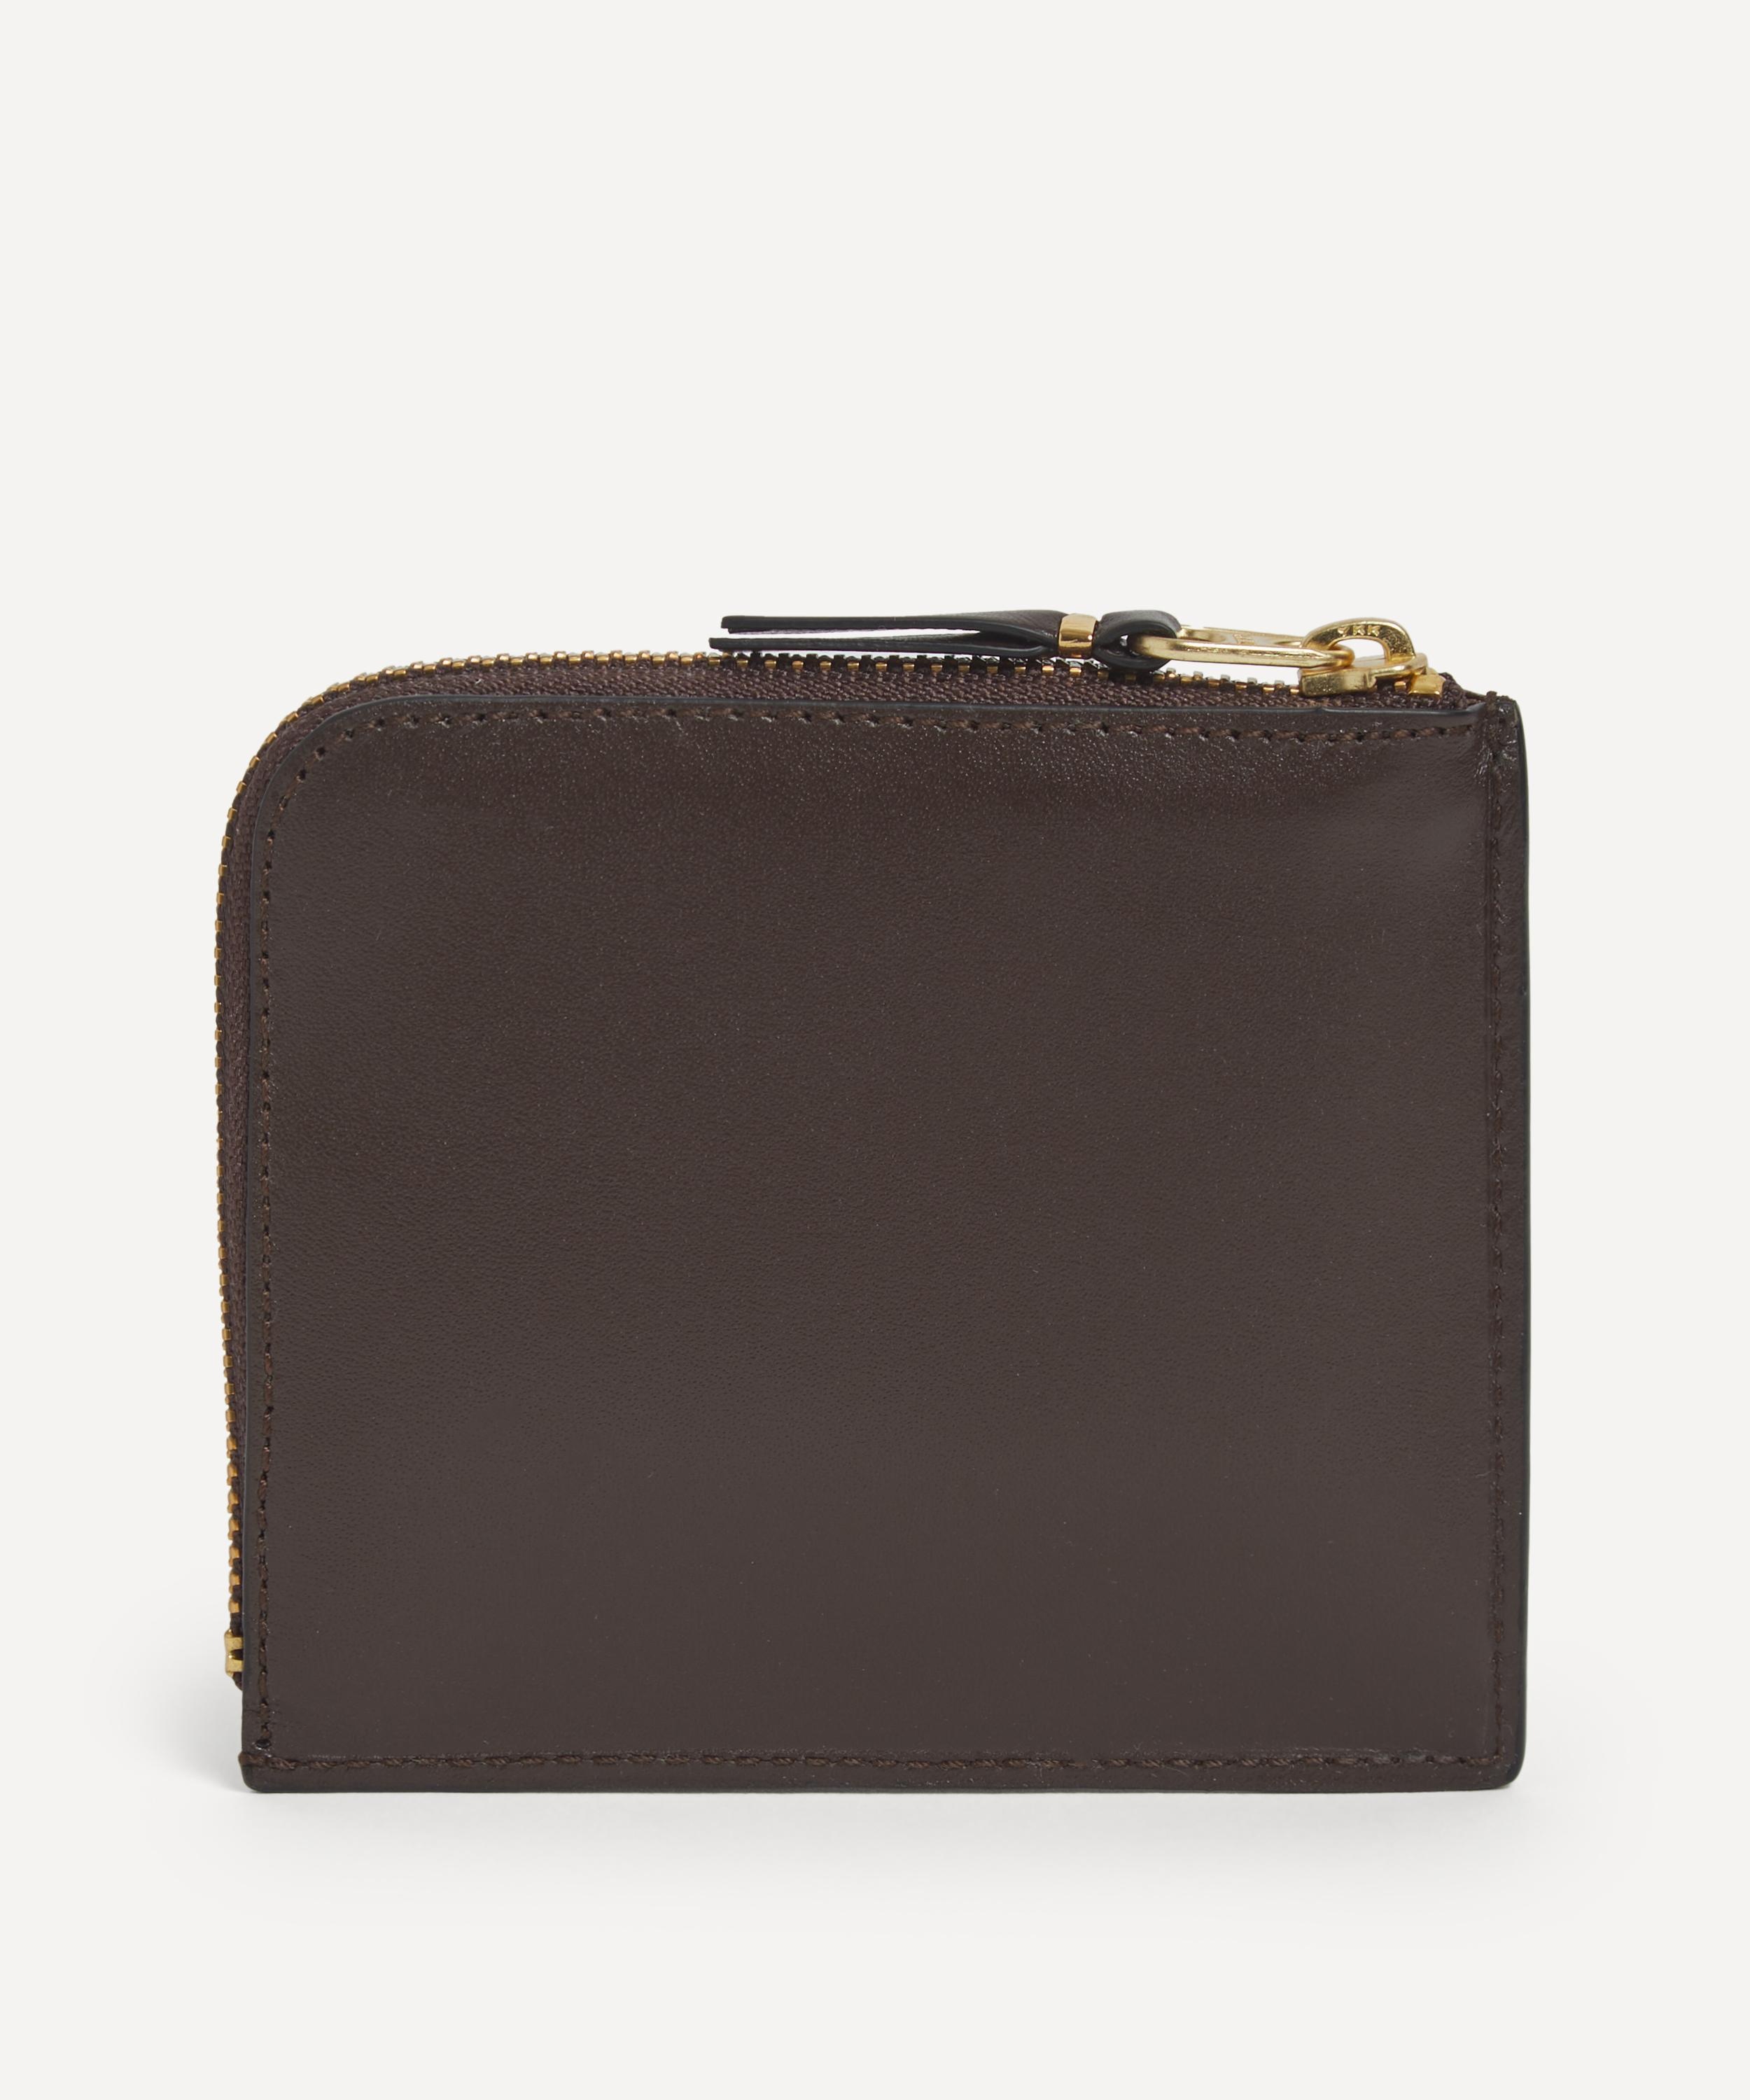 Outside Pocket Line Zip Around Leather Wallet - 3